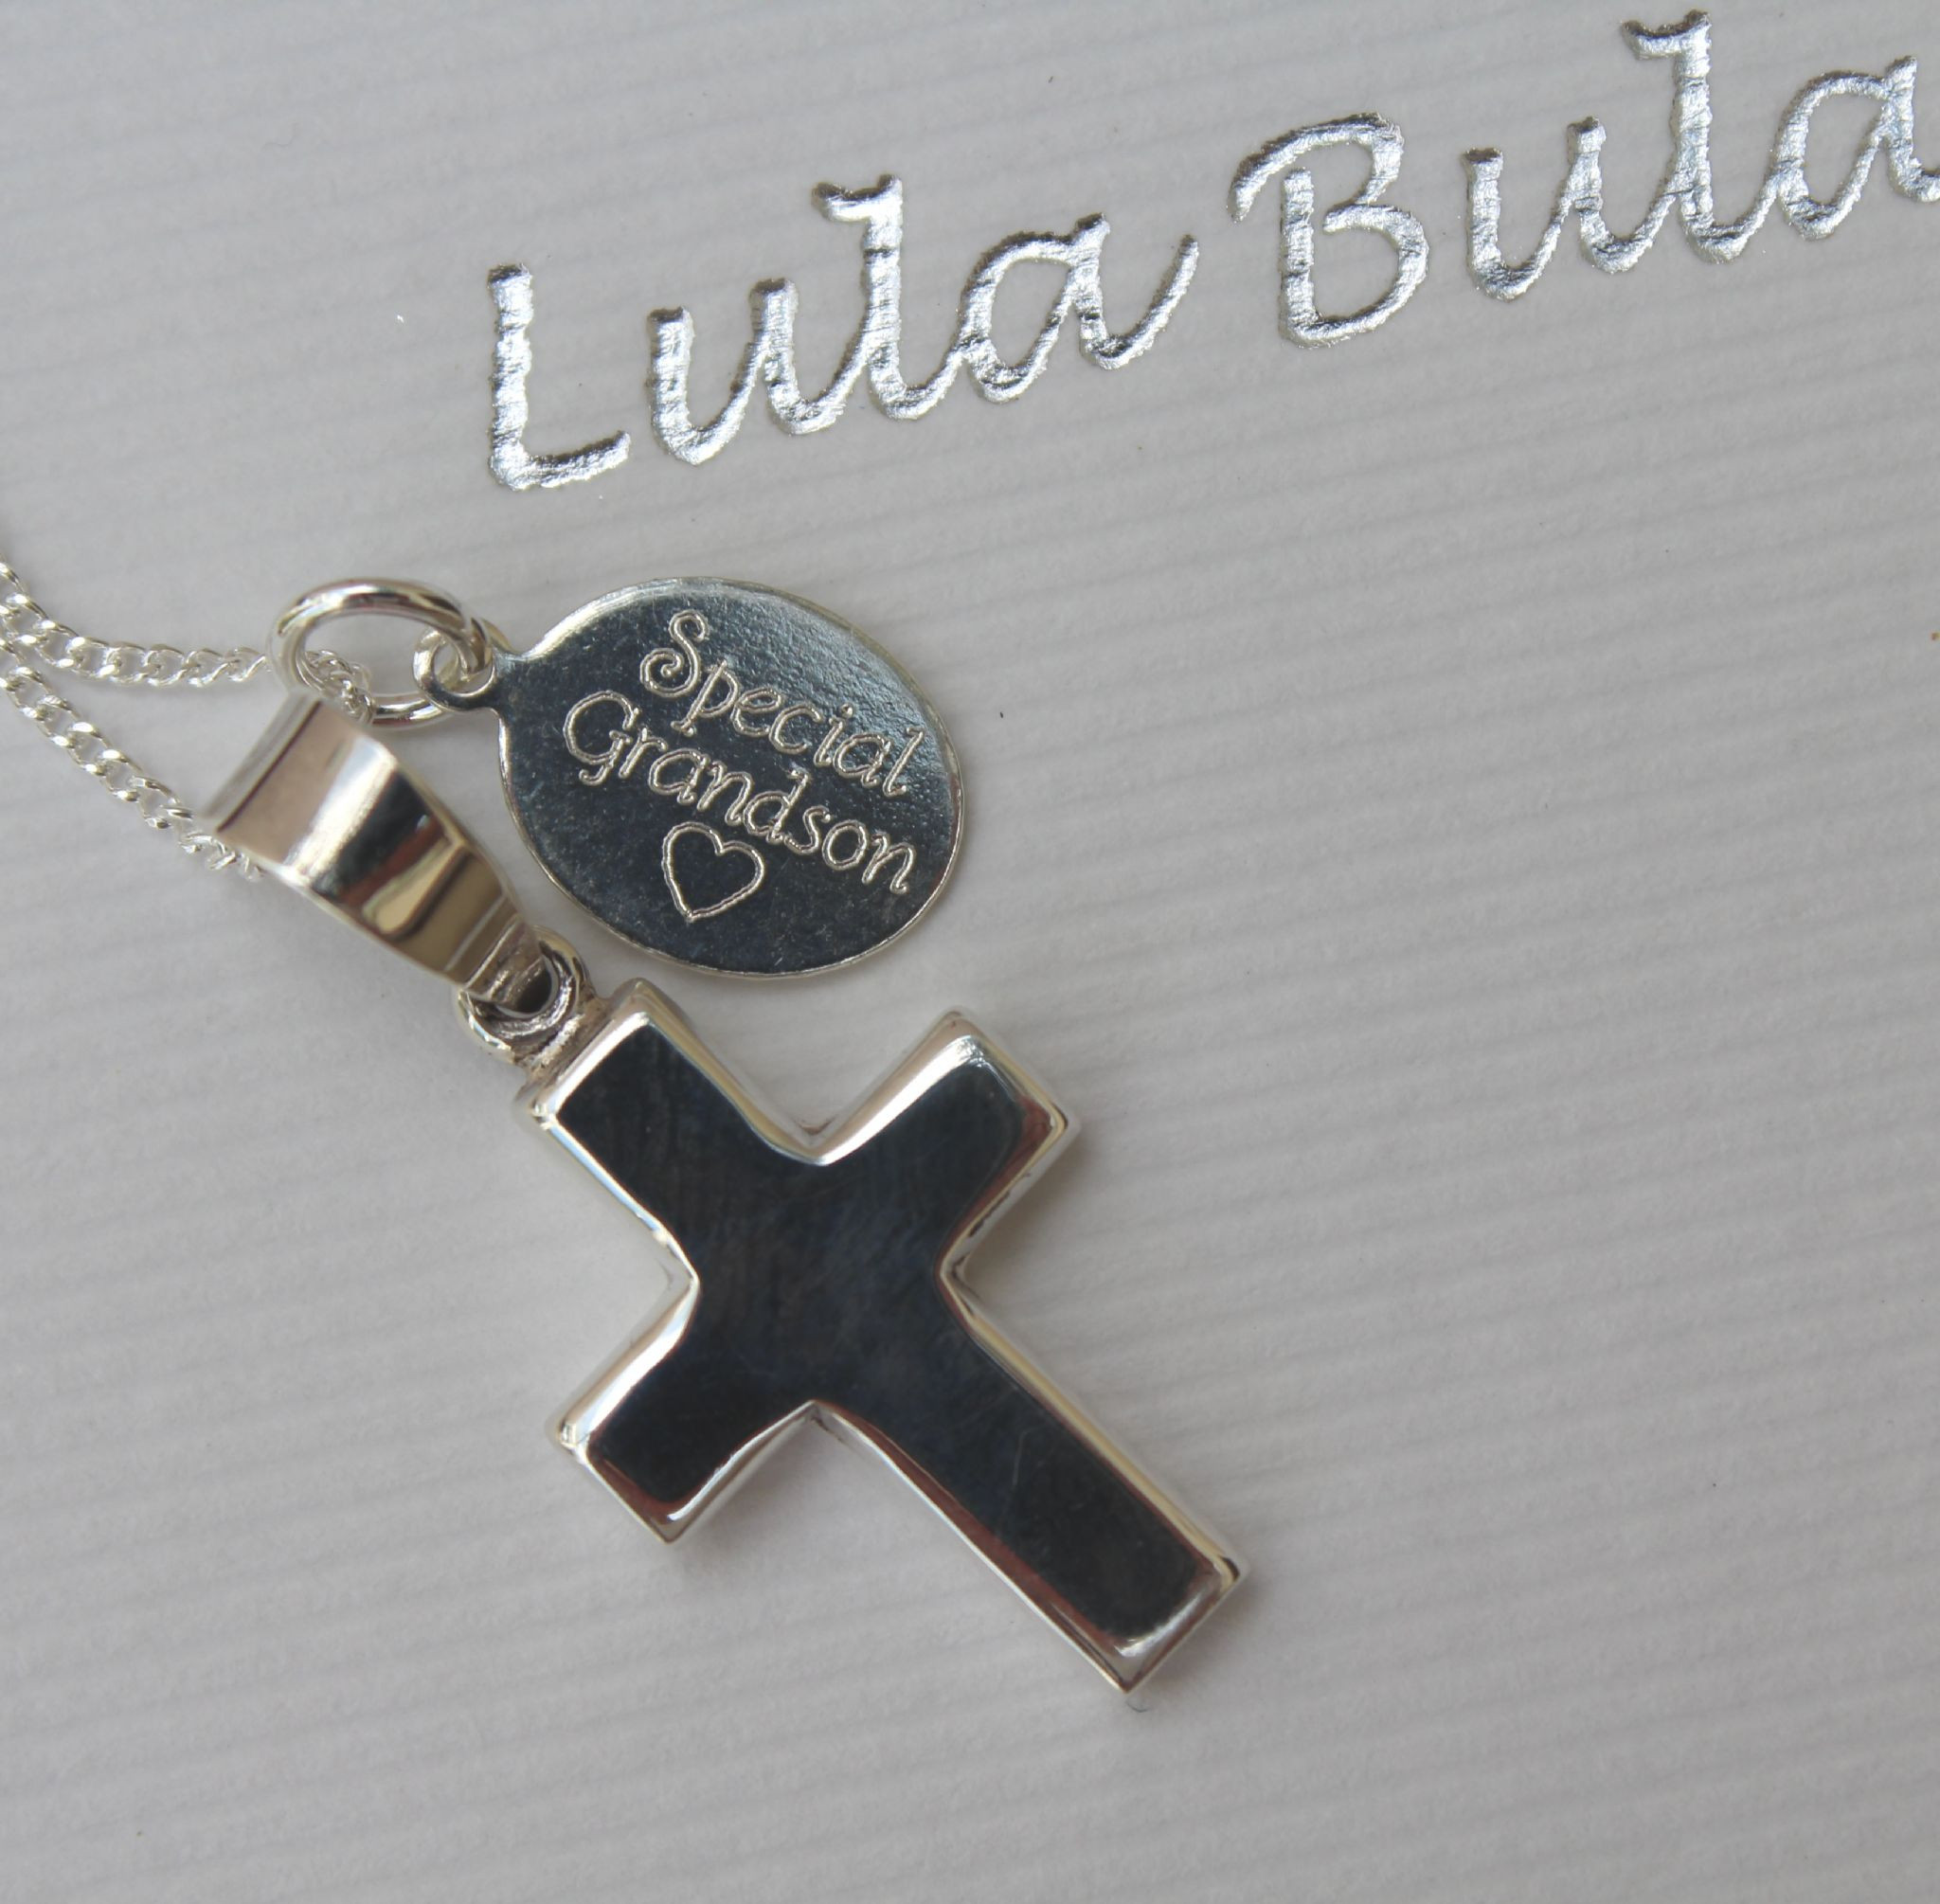 Boys First Communion Gift Ideas
 First Holy munion boy s t with personalised tag necklace